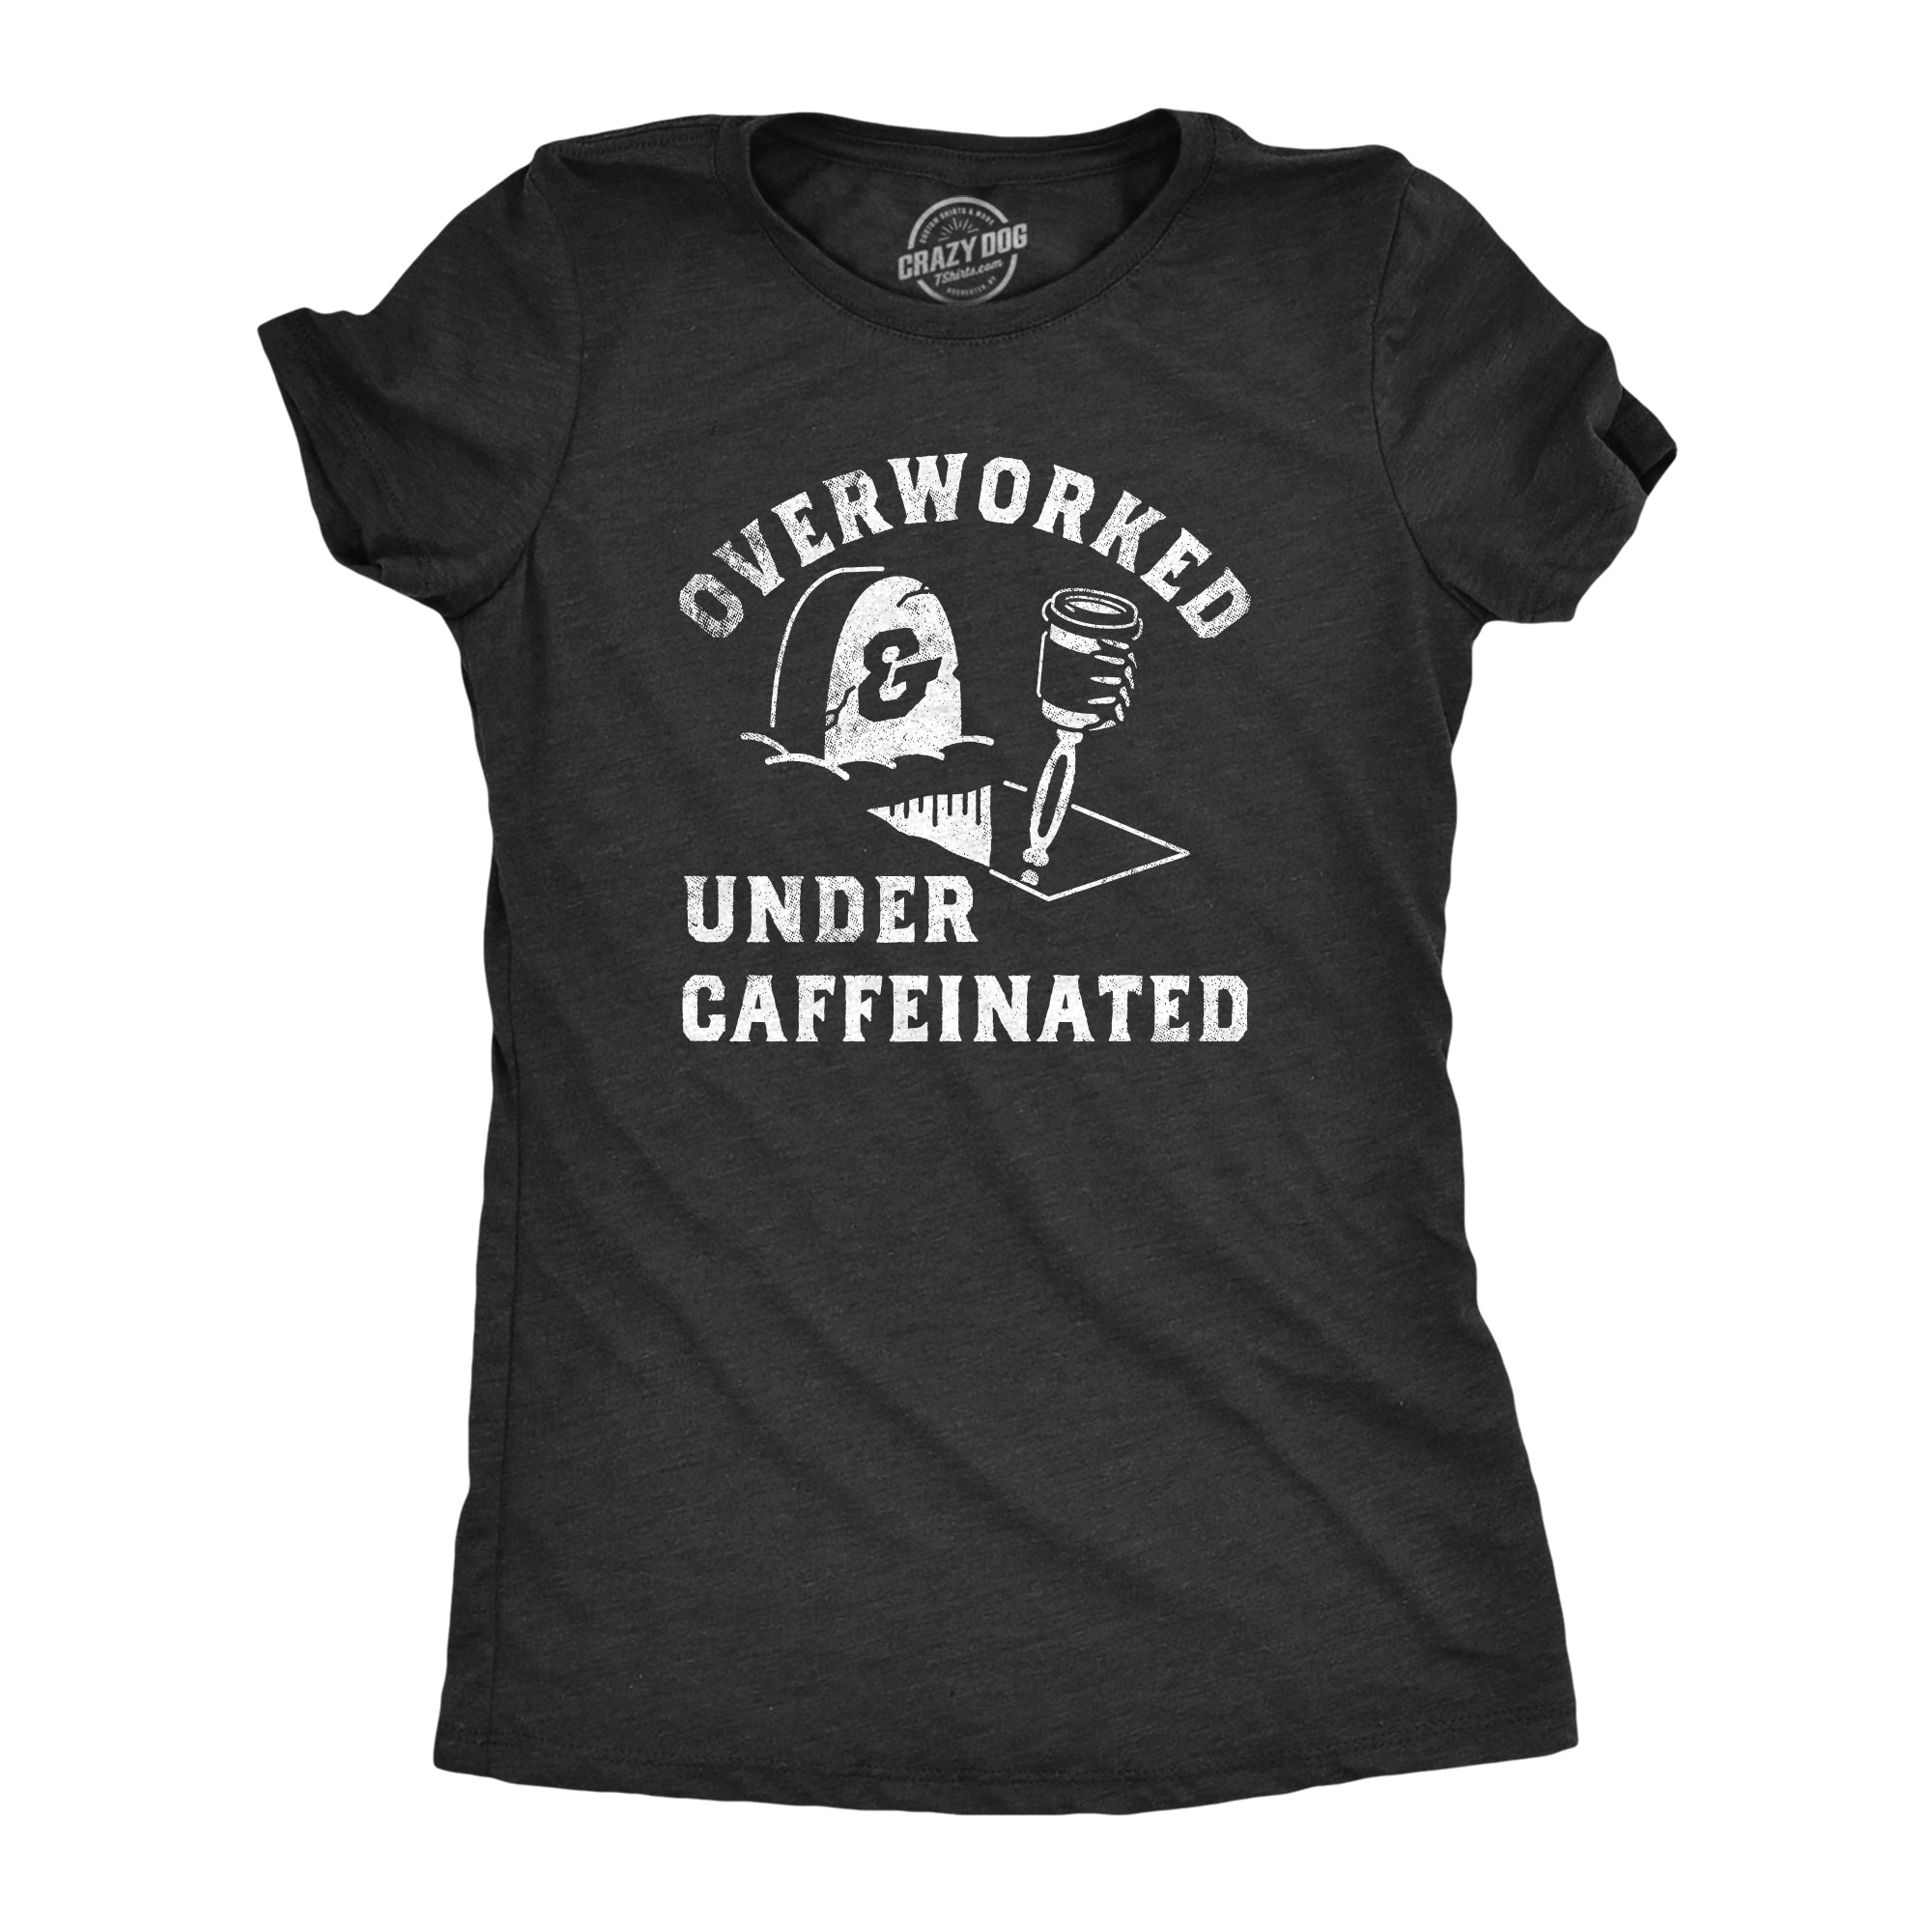 Funny Heather Black - OVERWORKED Overworked And Undercaffeinated Womens T Shirt Nerdy Coffee office Tee